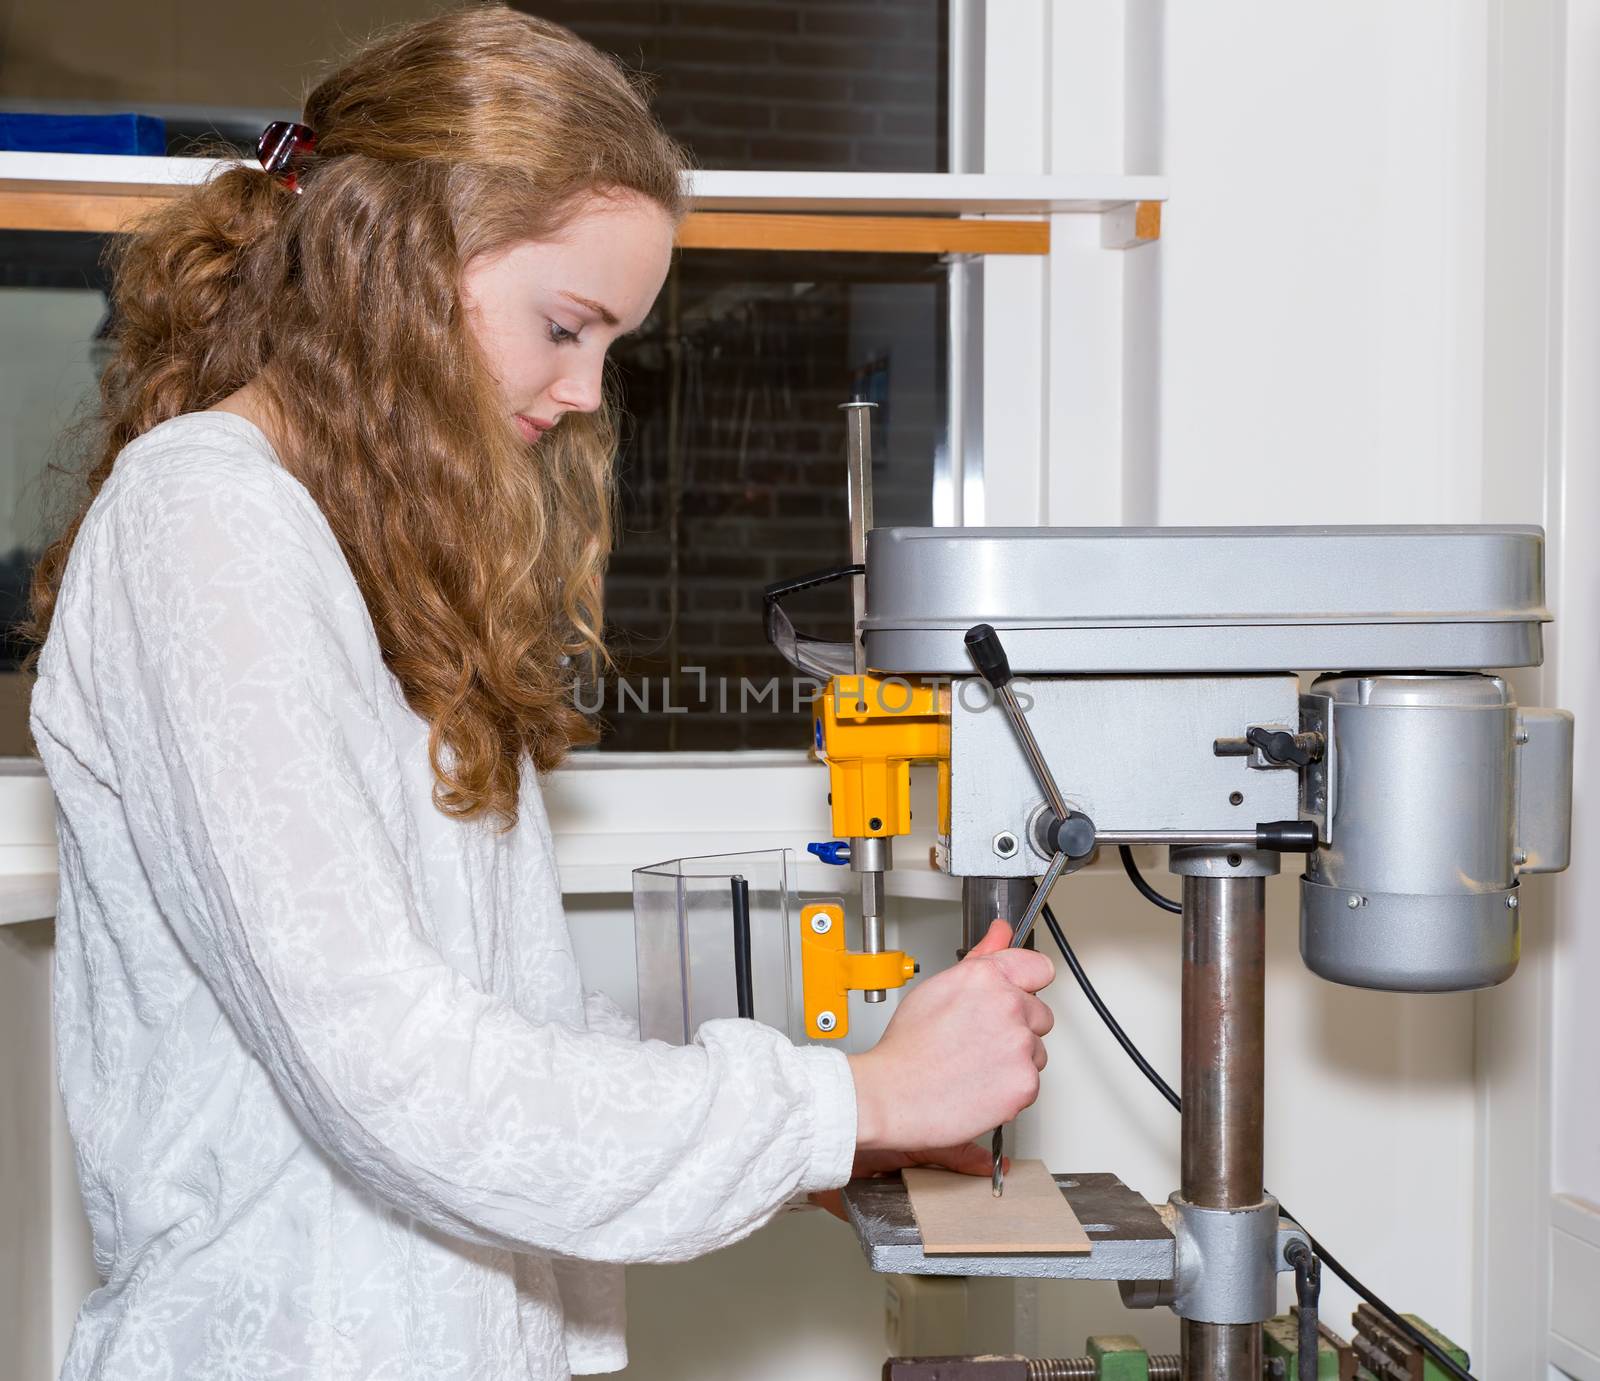 Dutch teenage girl operating electric drilling machine by BenSchonewille